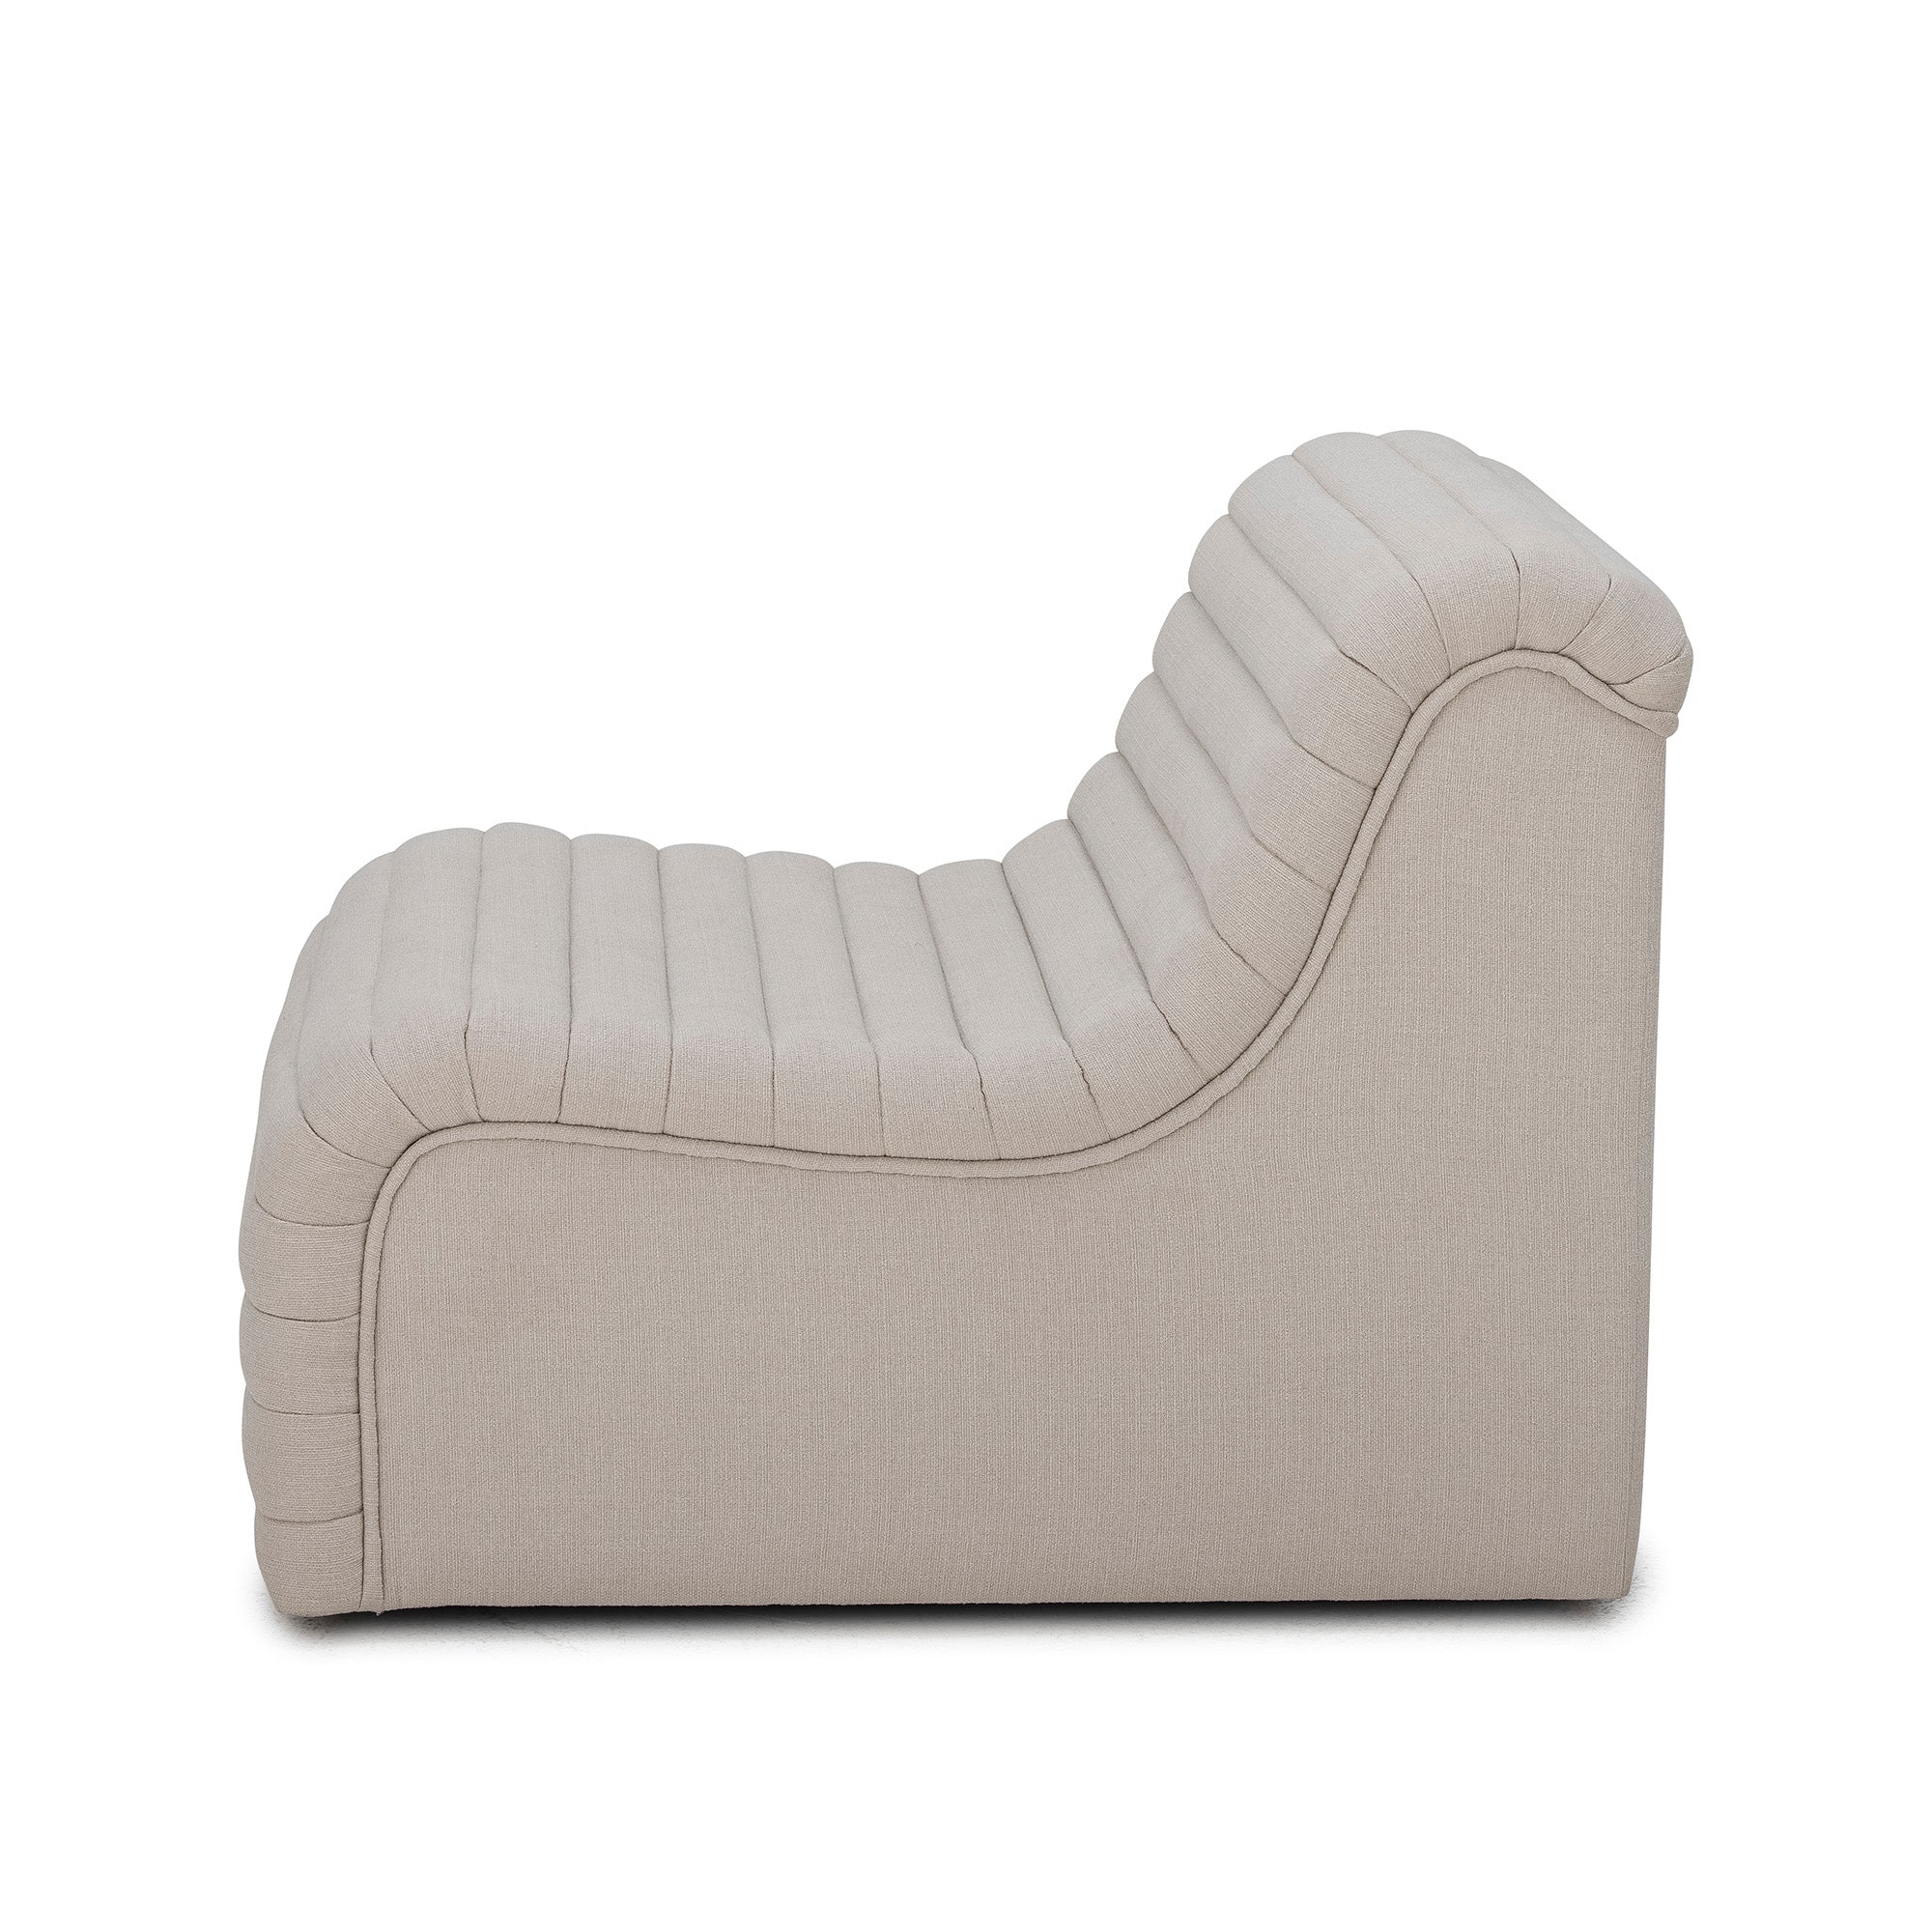 Lounge chair Allure